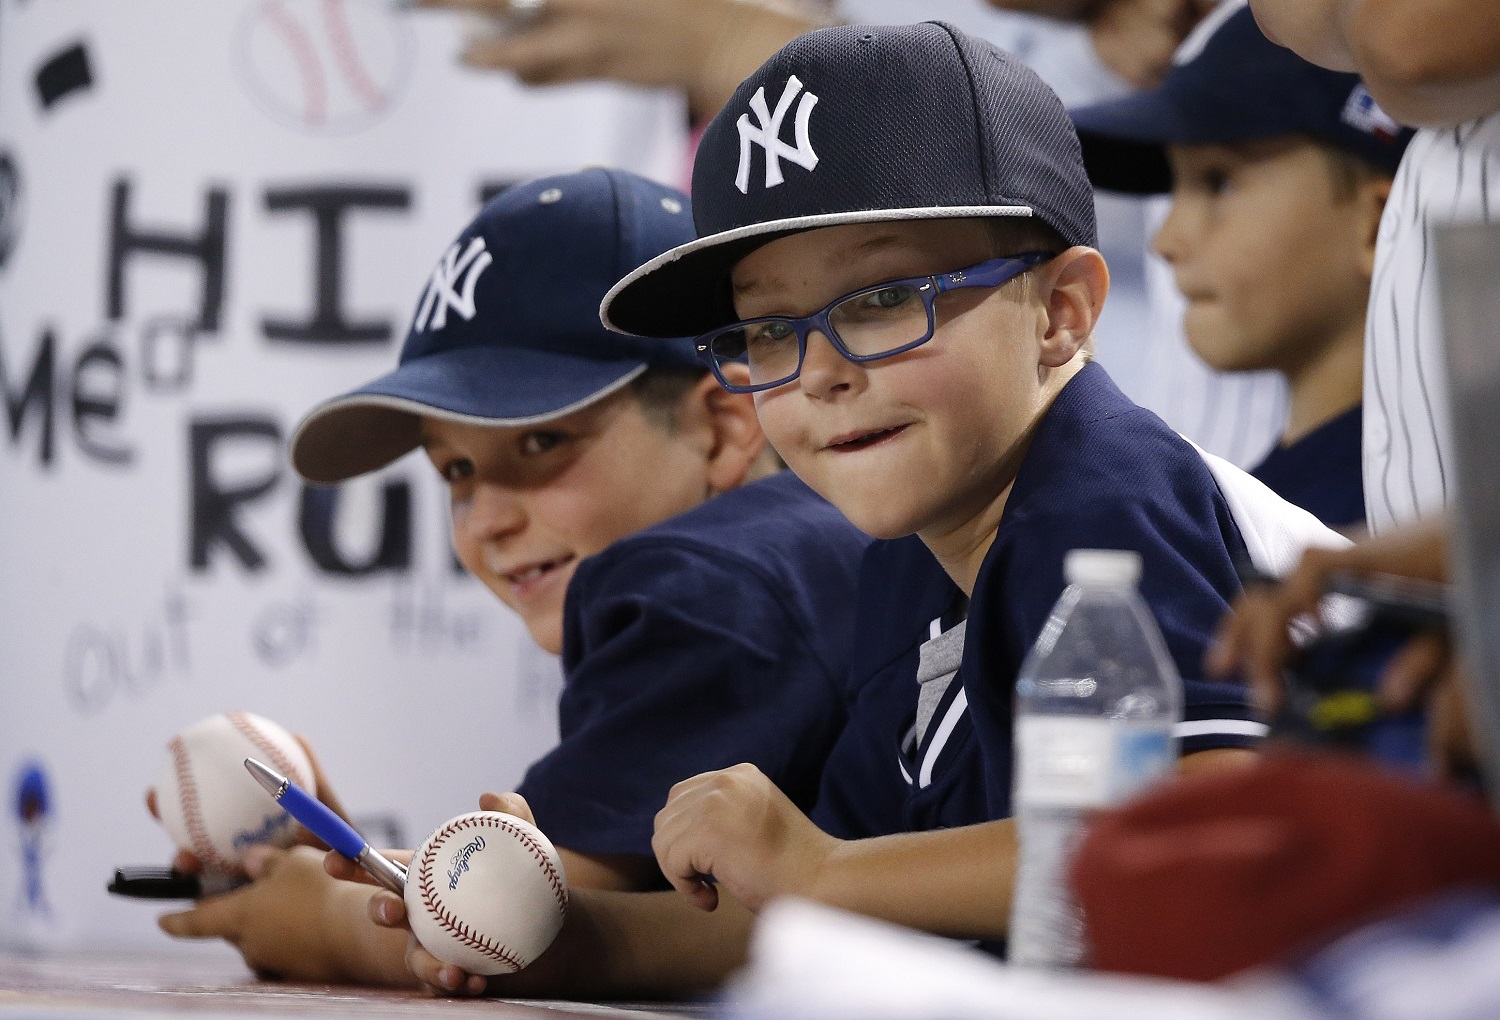 New York Yankees fans watch Yankees players warm up prior to a baseball game against the Arizona Diamondbacks Tuesday, May 17, 2016, in Phoenix. (AP Photo/Ross D. Franklin)